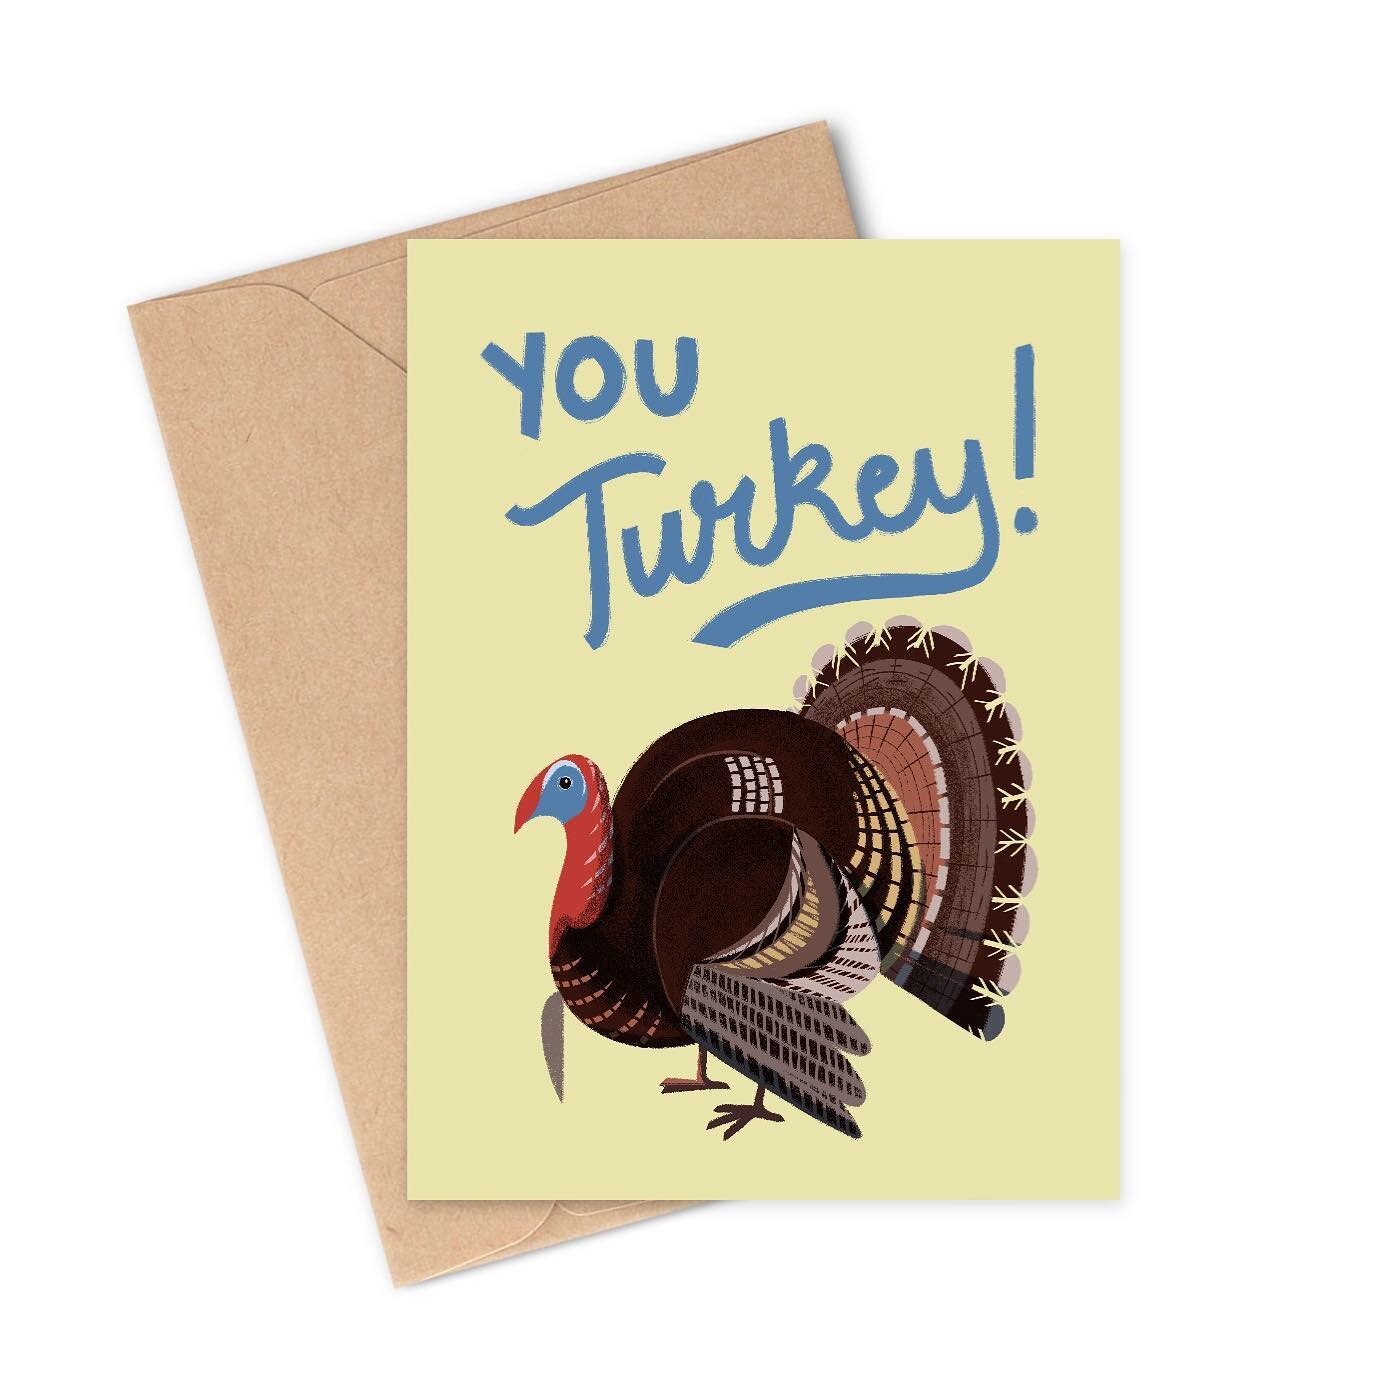 You Turkey! I am having fun with these... #stationery #greetingcards #illustration #illustrationartists #printandpattern #handtype